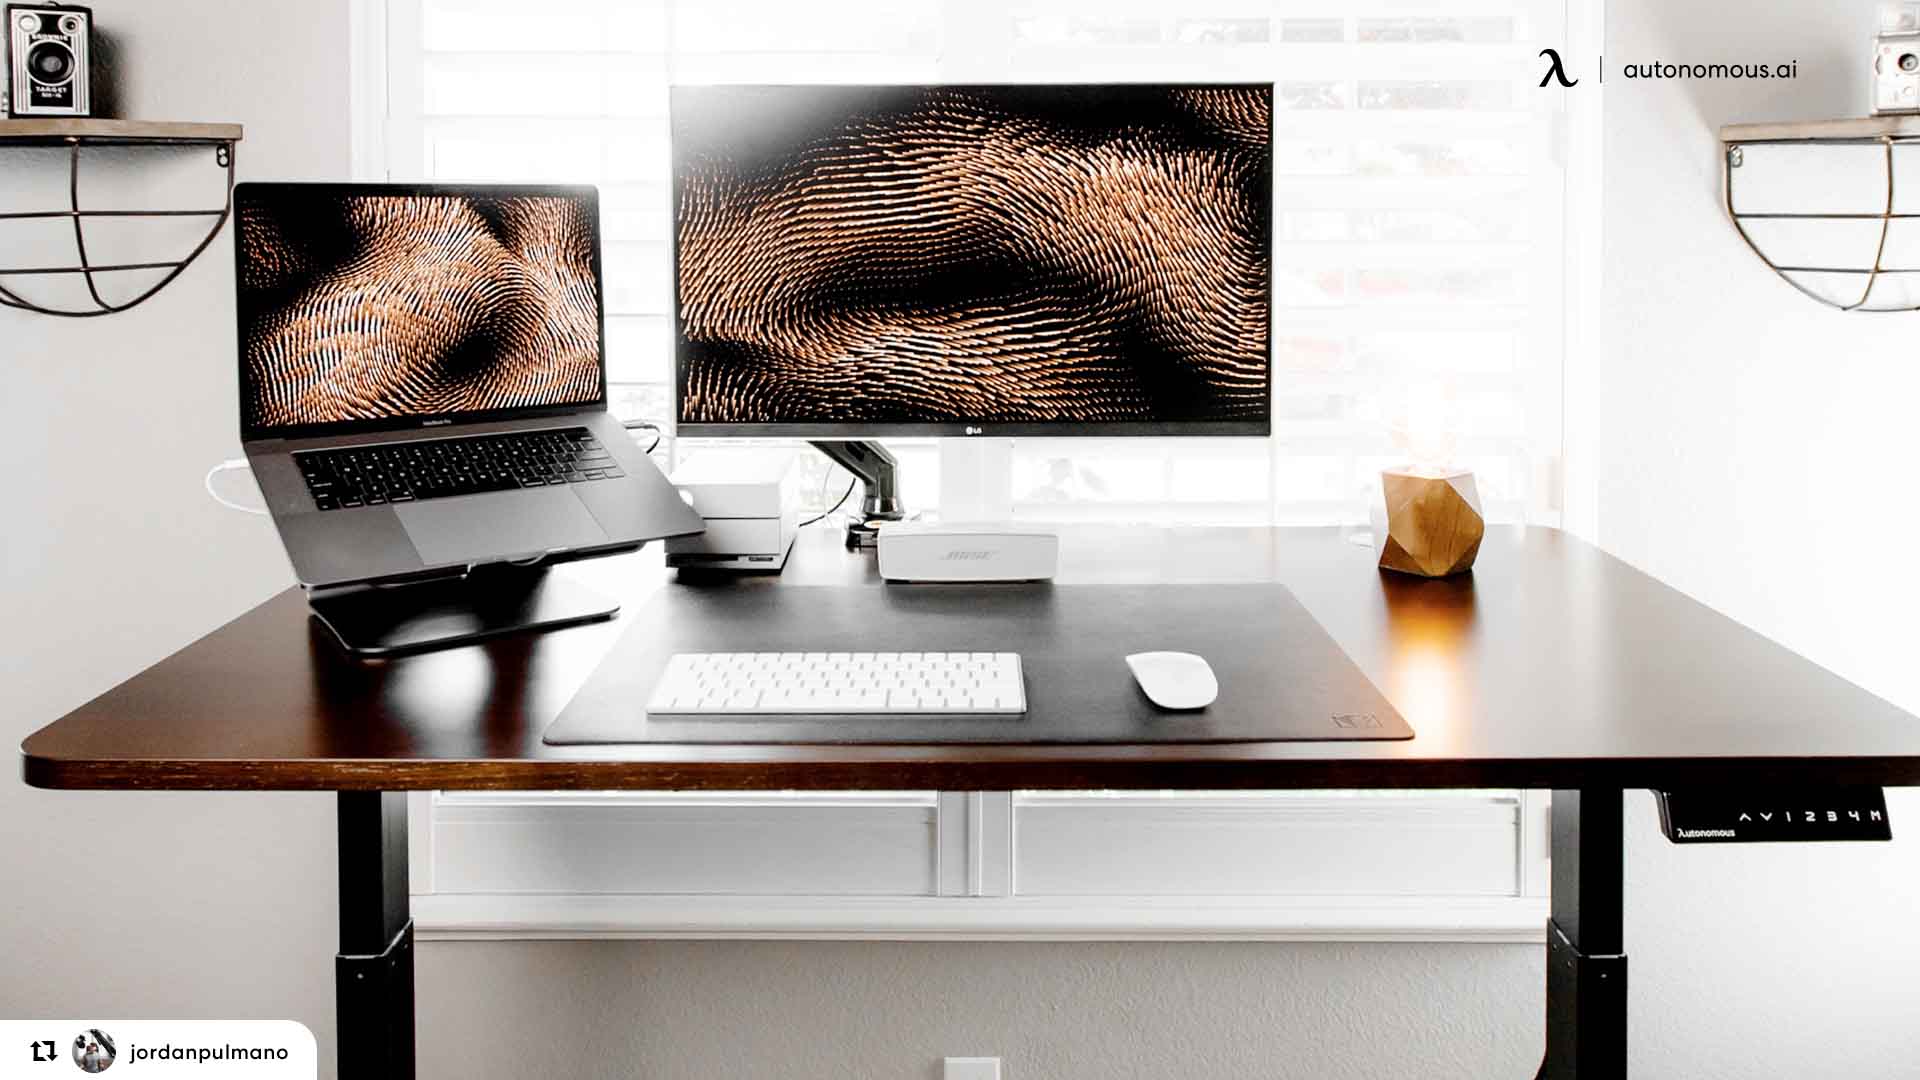 https://cdn.autonomous.ai/static/upload/images/common/upload/20211002/15-Amazing-Desks-for-Working-from-Home-2021_324f02950ee.jpg